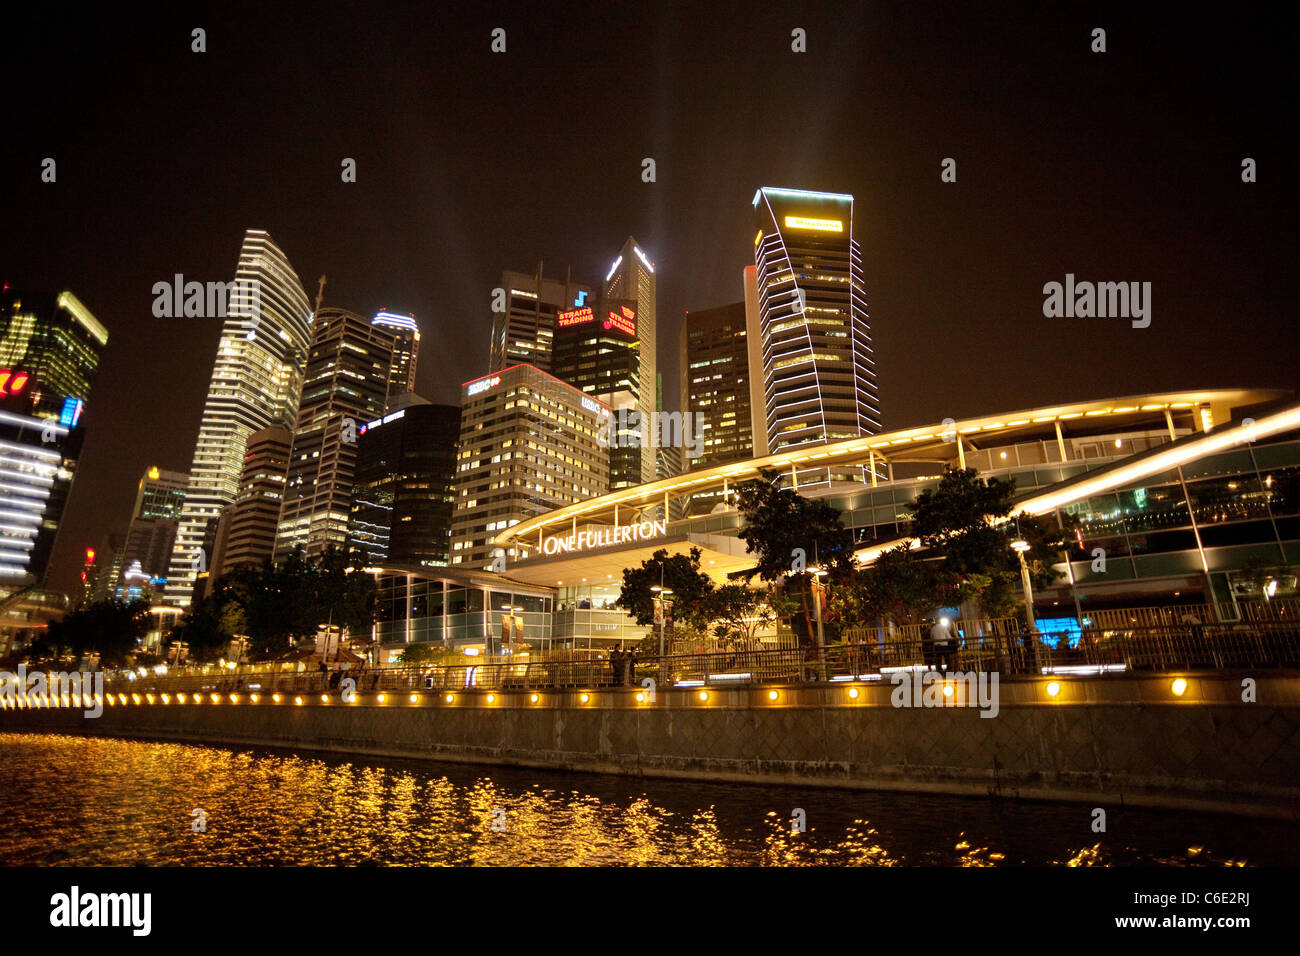 One Fullerton, the marina and the financial district at night, Singapore, Asia Stock Photo